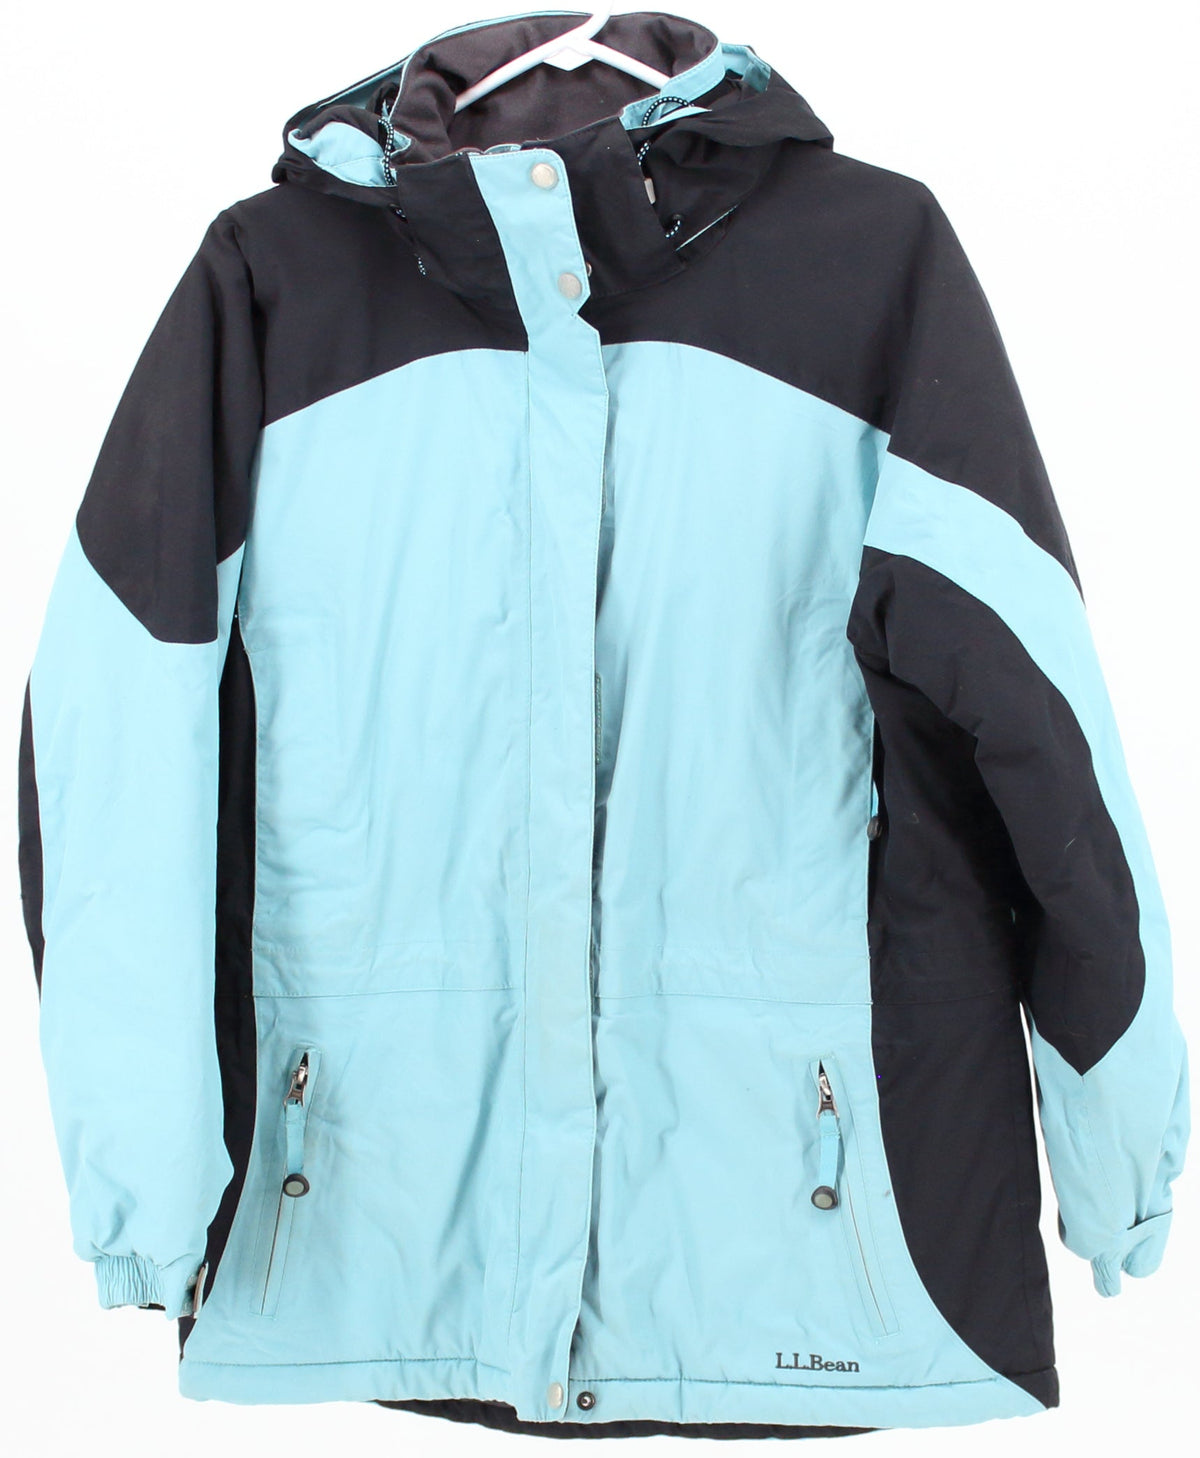 L.L.Bean Black and Light Blue Mid Insulated Coat